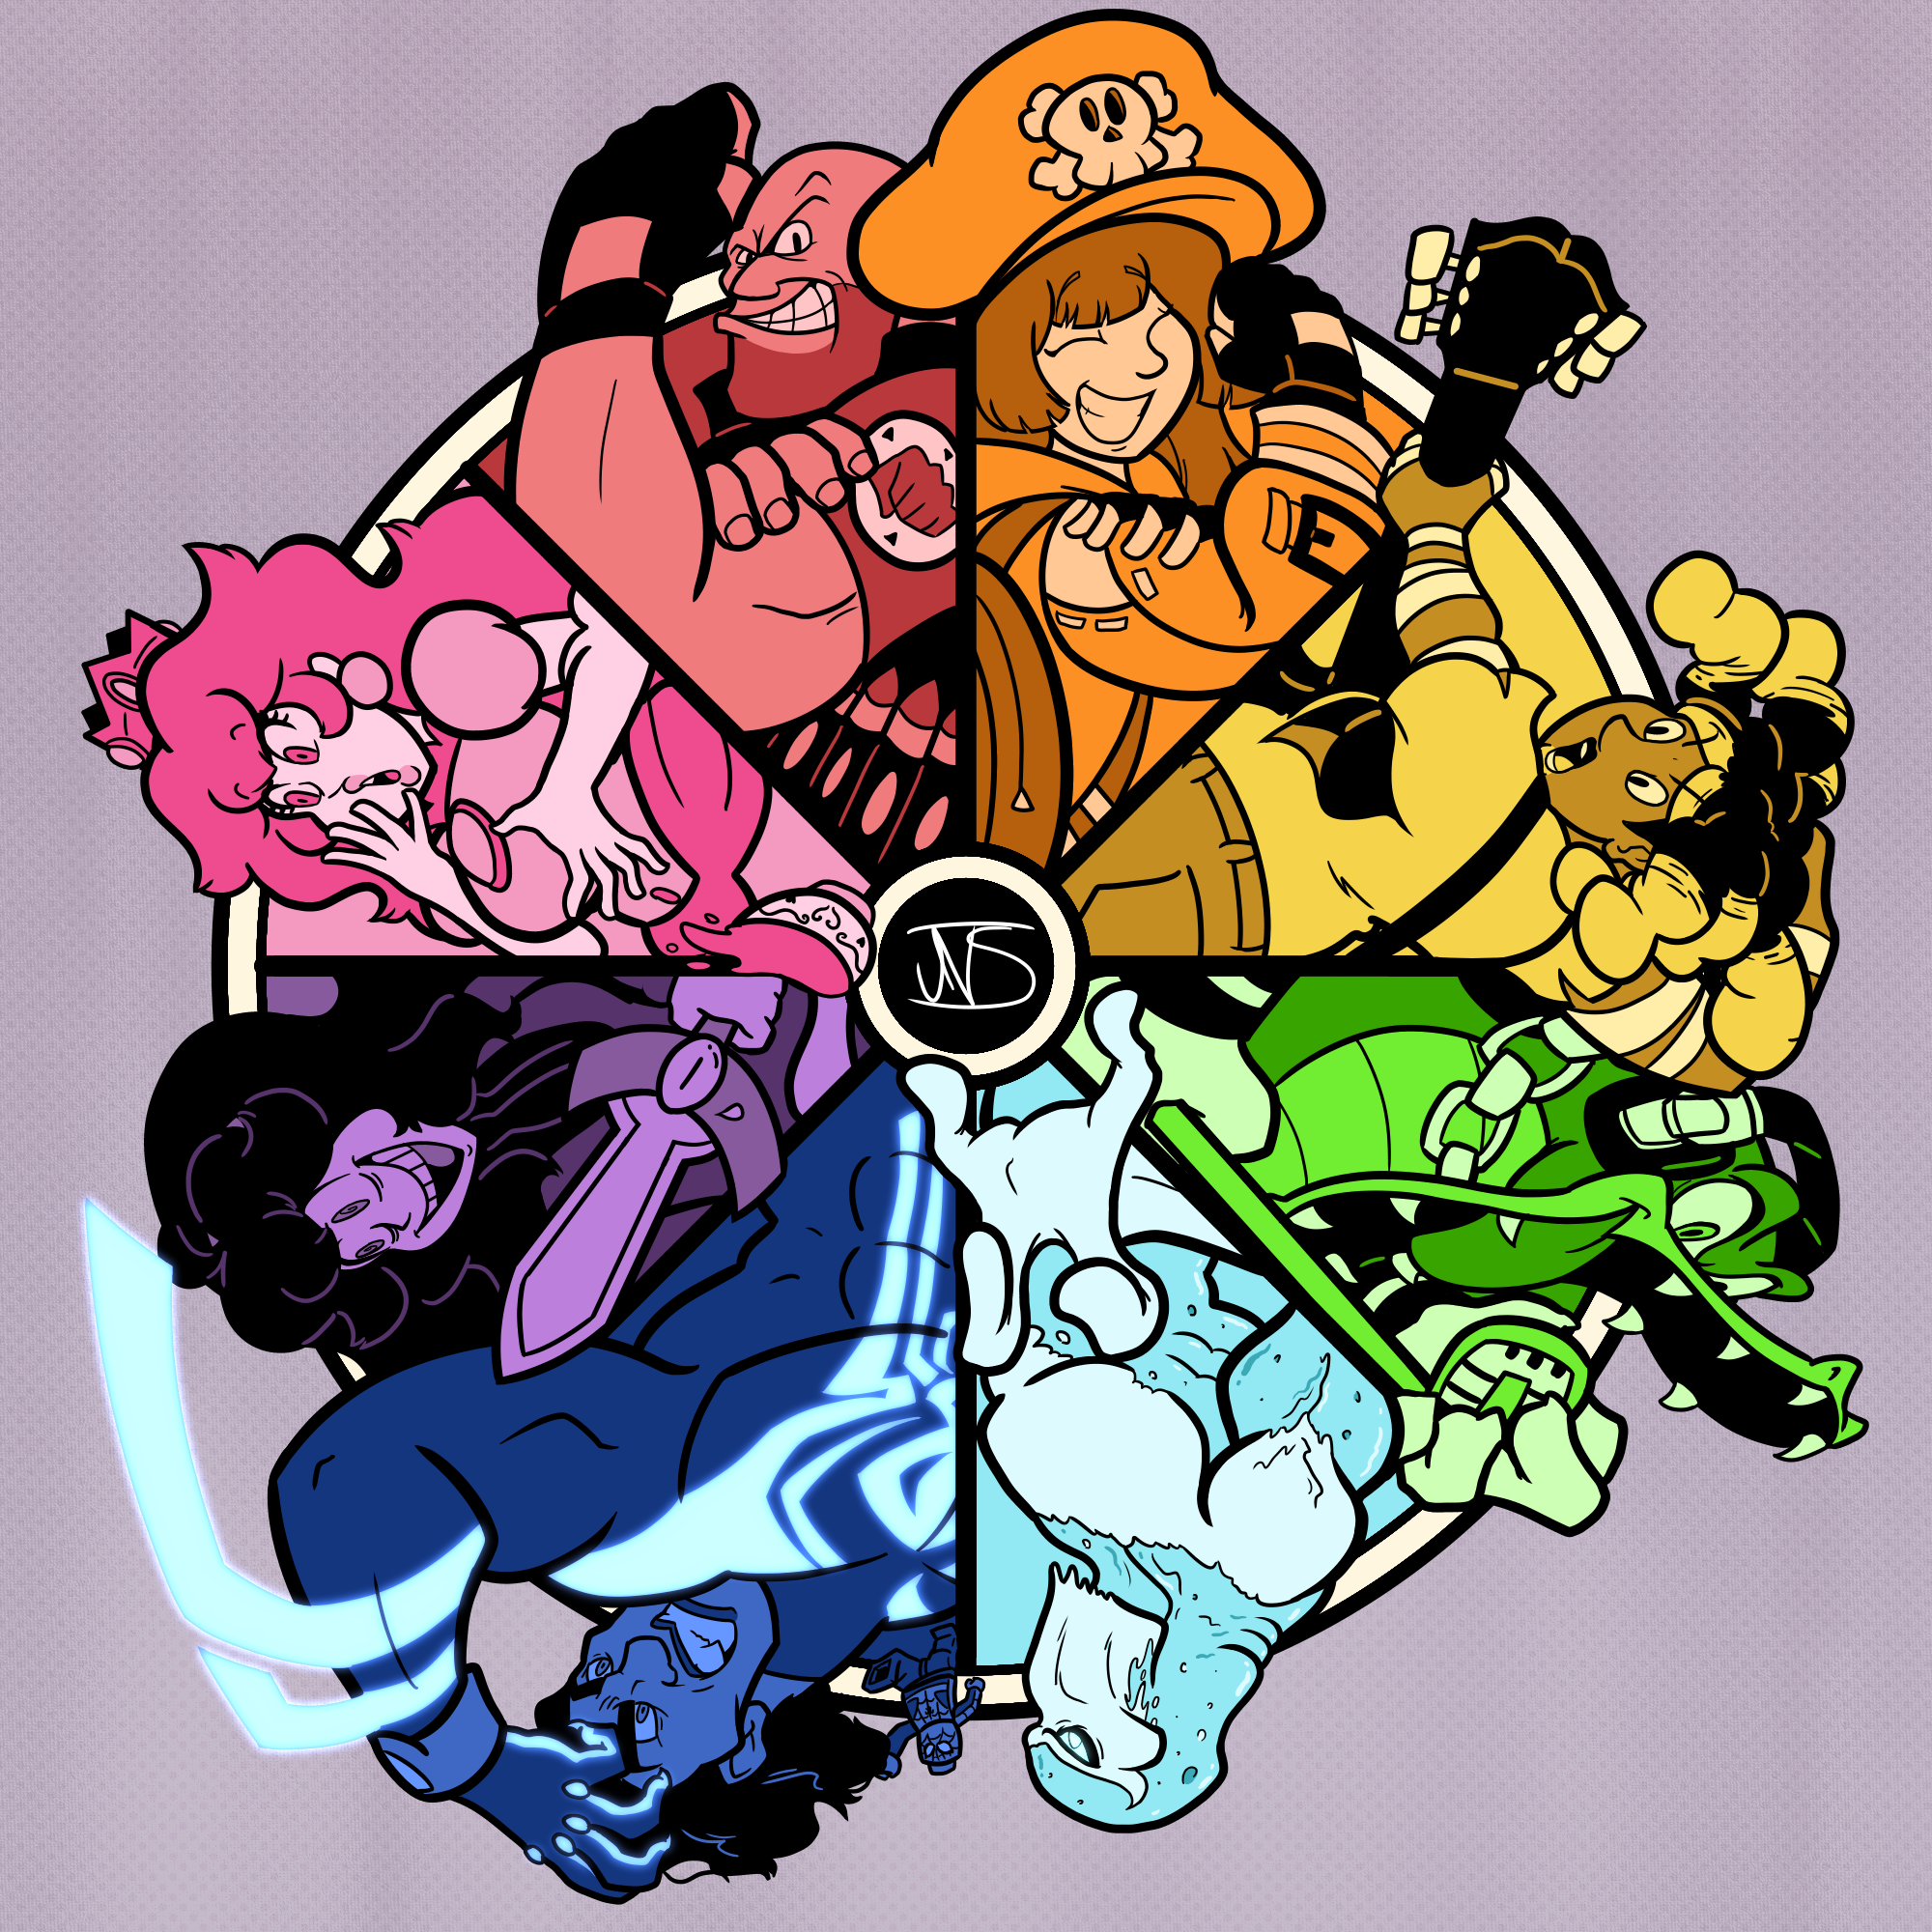 Various characters arranged in a circle with a corresponding color. Heavy Weapons Guy, May, Cherry Hunter, Vector the Crocodile, Glacius, Spider-Man 2099, Hex Maniac and Princess Peach are all present.